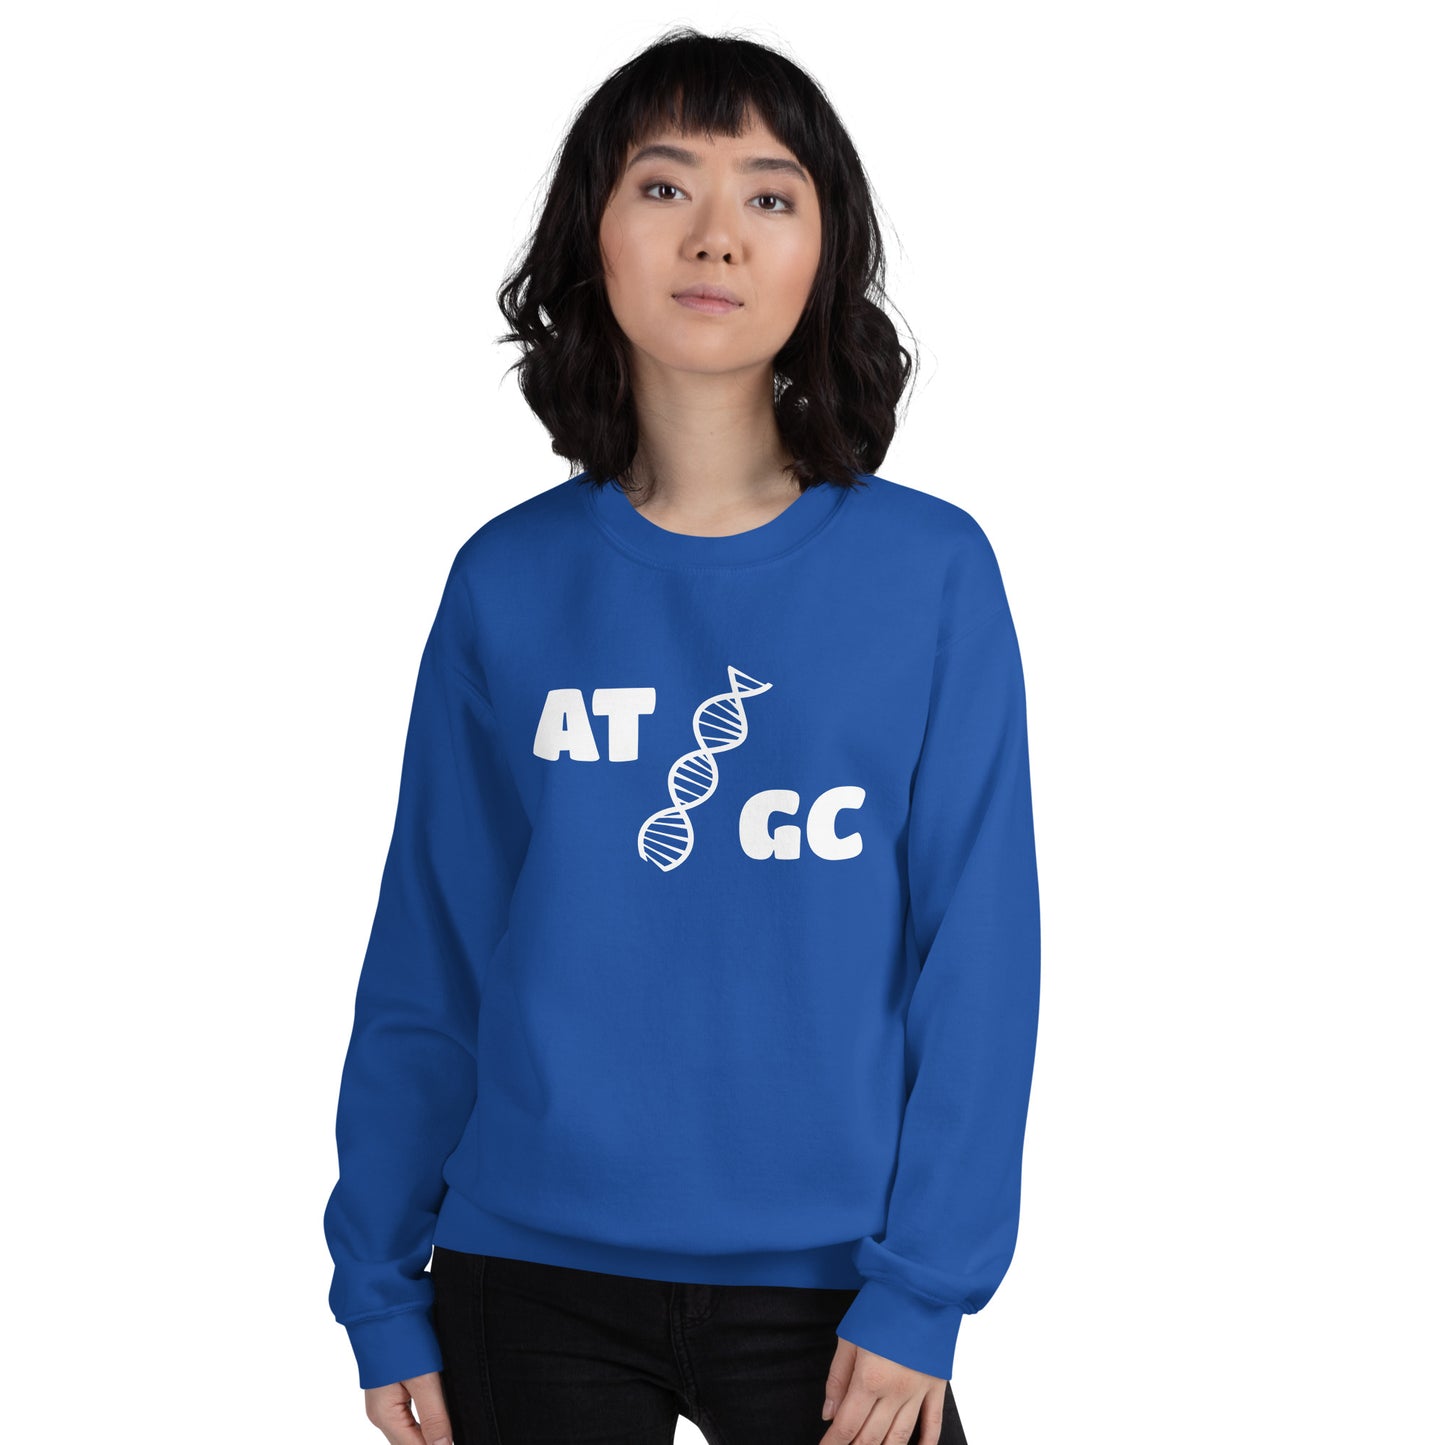 Women with royal blue sweatshirt with image of a DNA string and the text "ATGC"